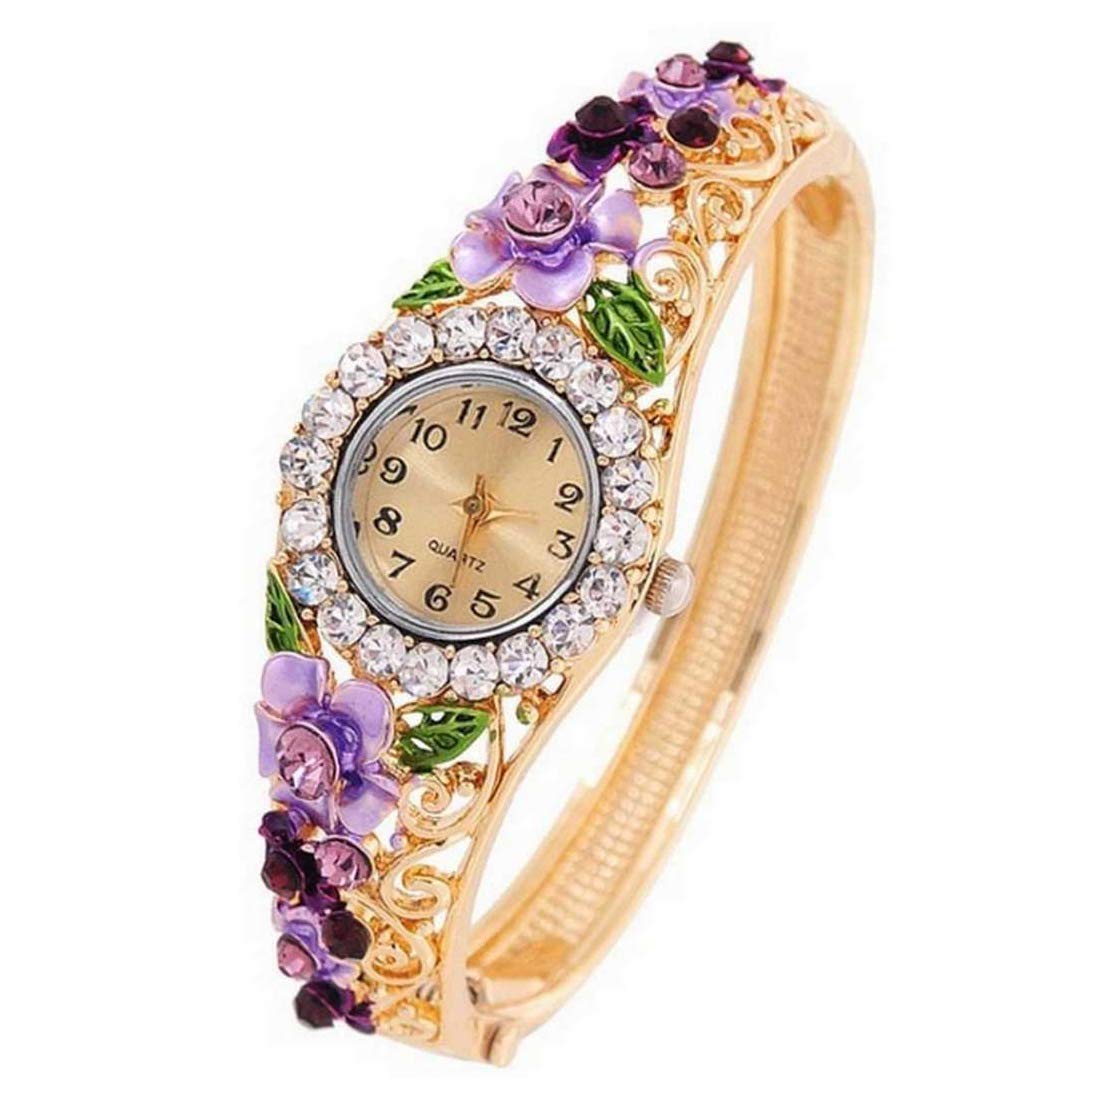 Yellow Chimes Exclusive Floral Design Multi Color Crystal Watch Kada Bangle Bracelet for Women